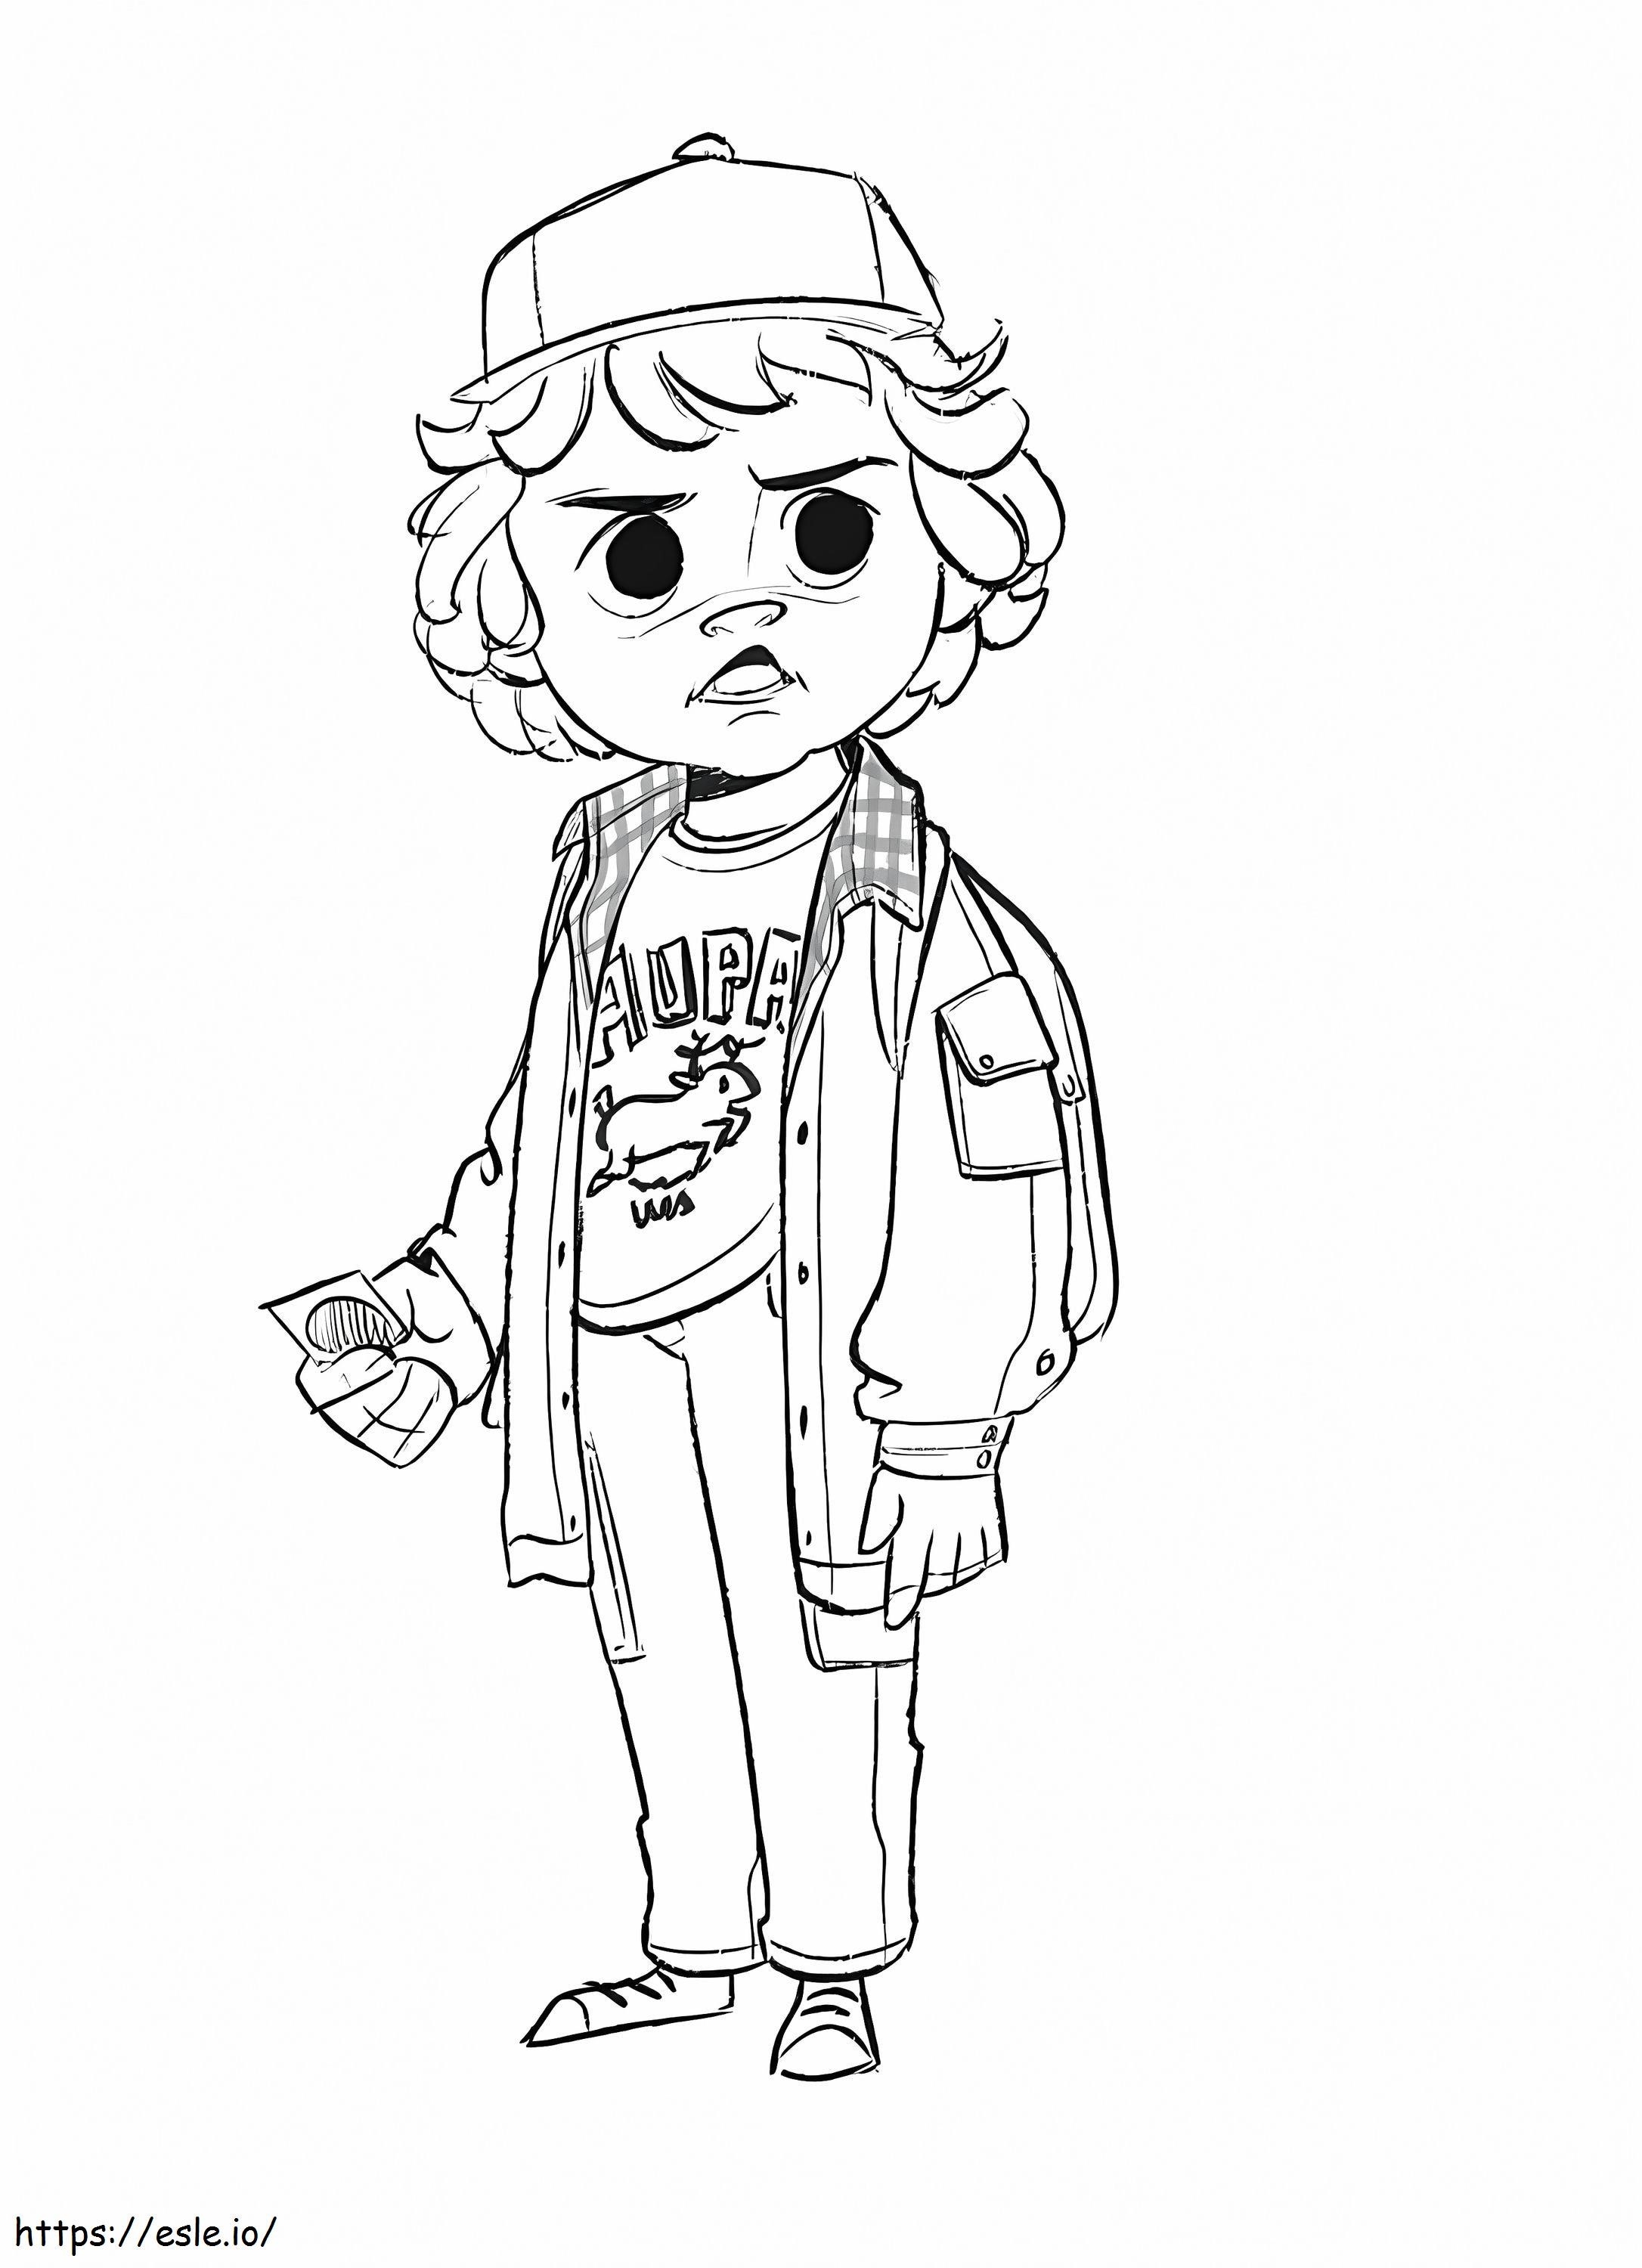 Dustin stranger things coloring page